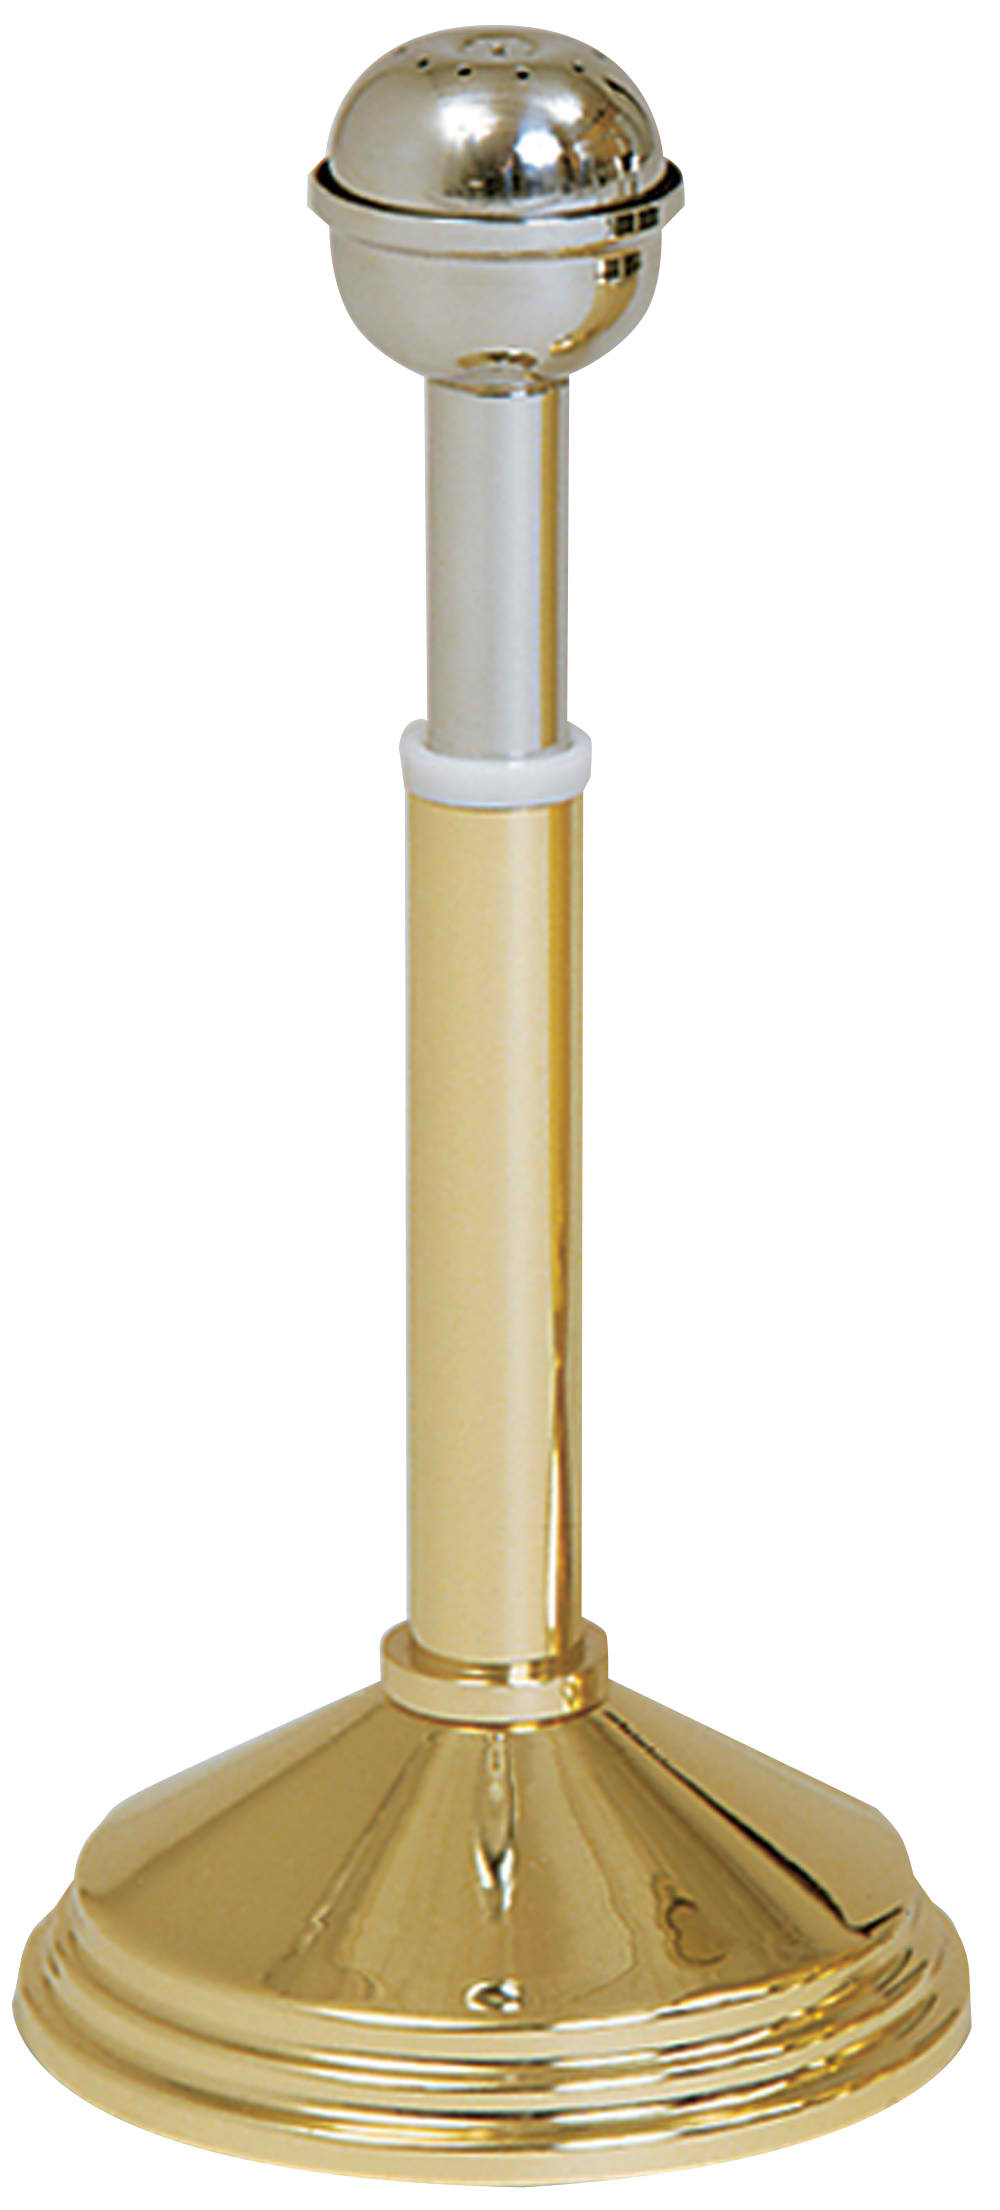 K409 Gold Holy Water Sprinkler with Stand